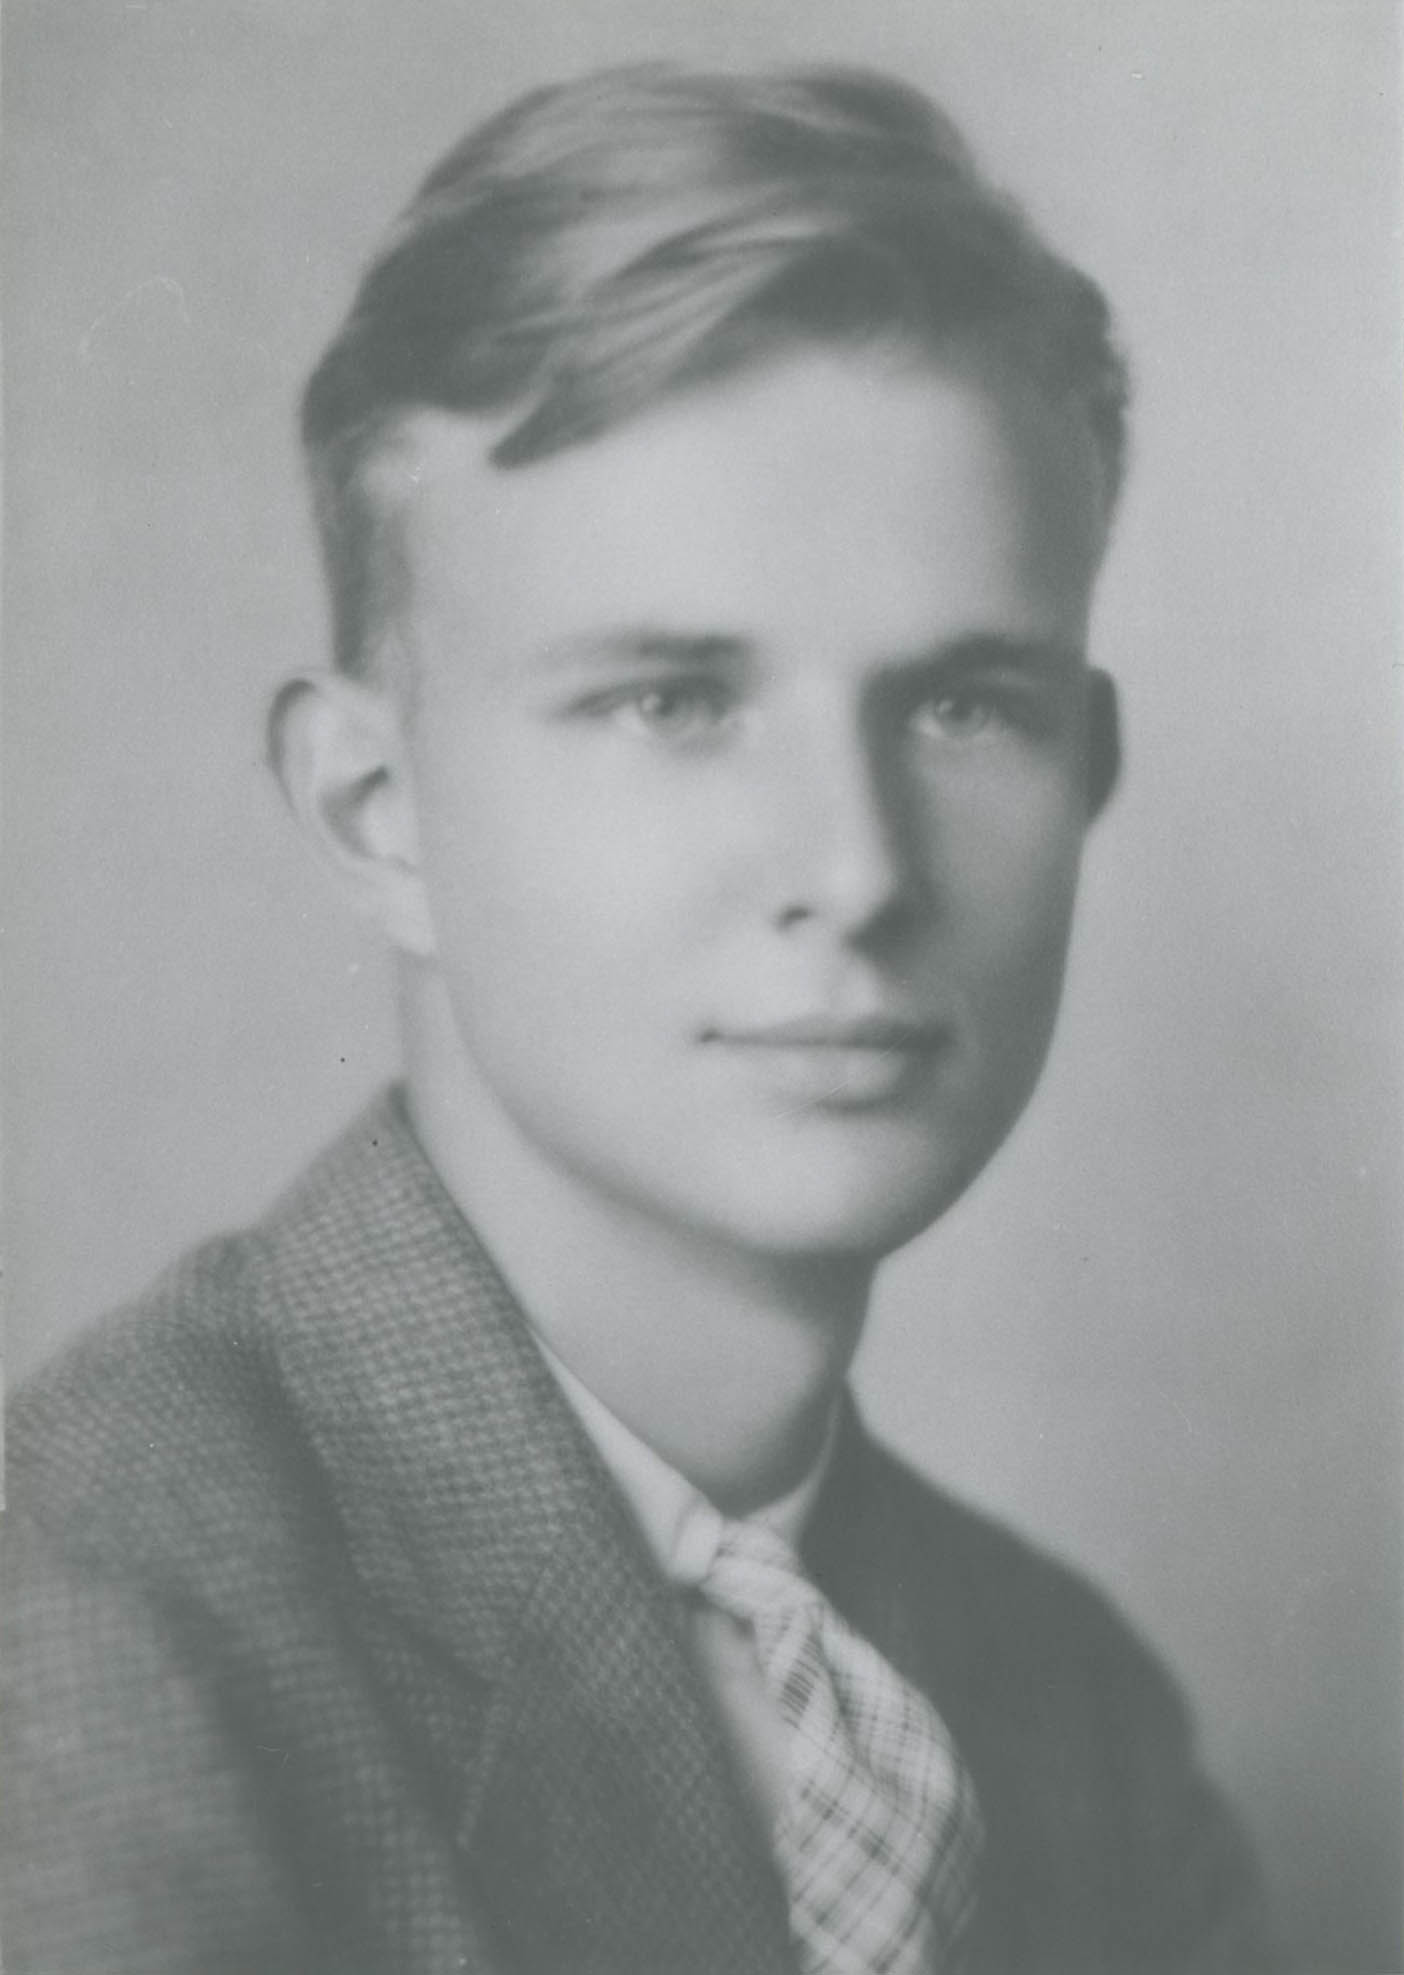 A portrait of Robert Motherwell at age 20 in 1935